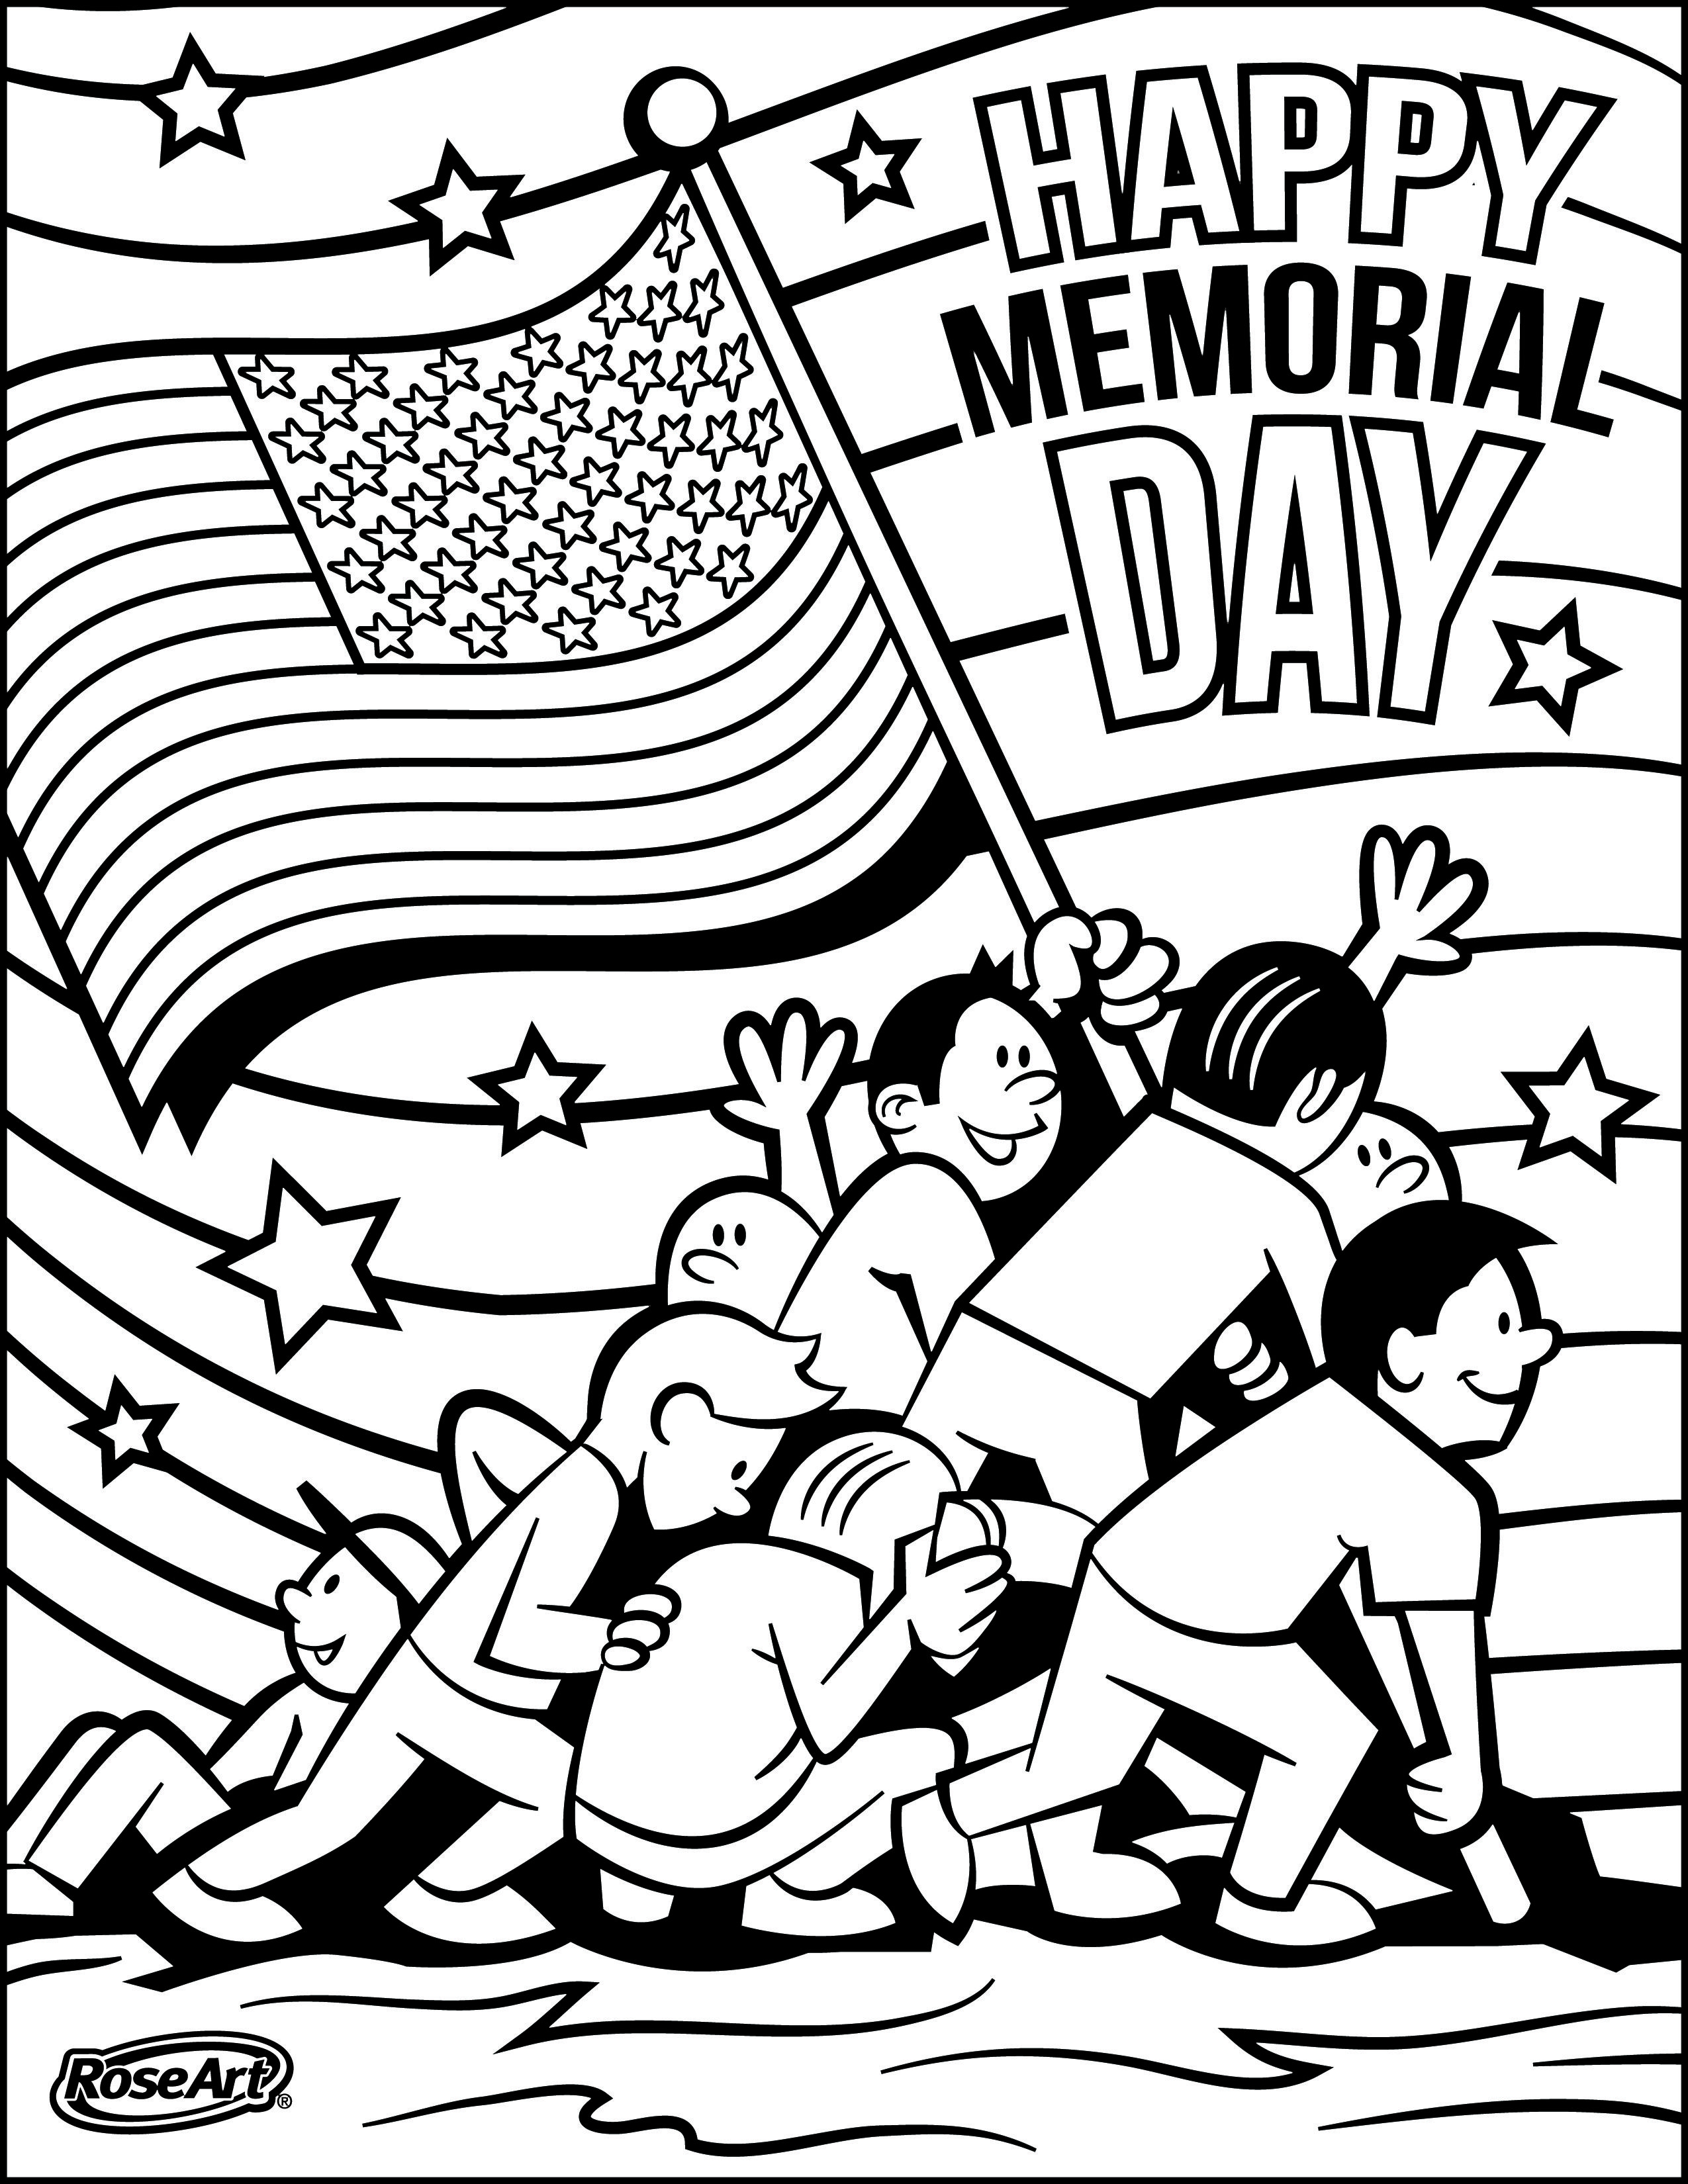 A memorial day coloring sheet from roseart just click print for an afternoon of â memorial day coloring pages coloring pages inspirational flag coloring pages